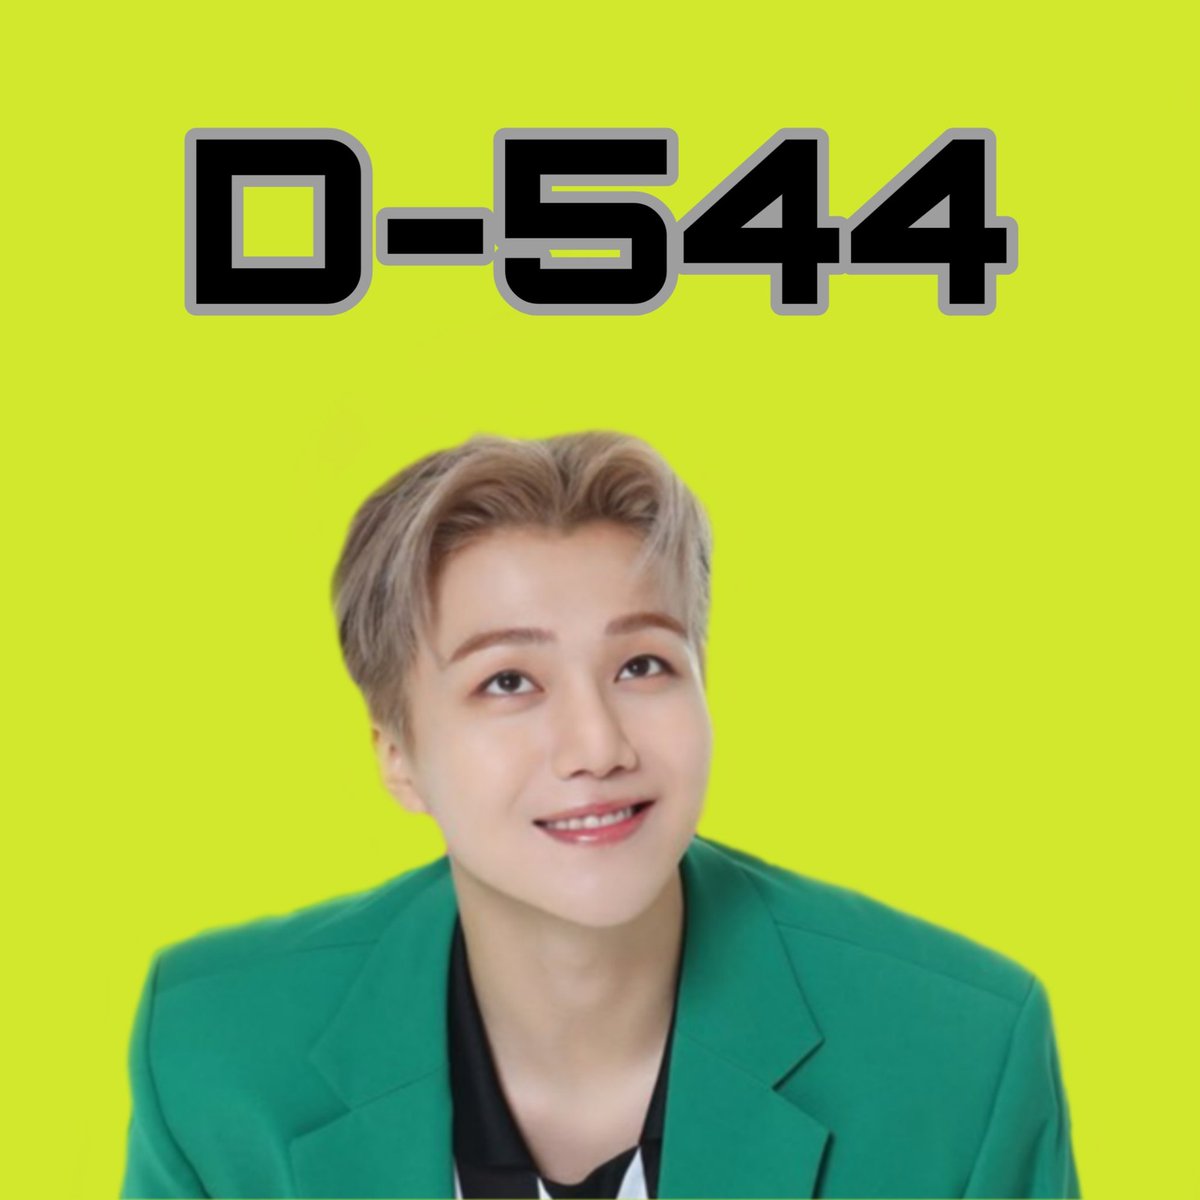 D-544-어빠 잘 지내셨어요? Pentagon's recording round3 today.....Although you're away from your love ones, always think that we are here waiting for you. Take care jinhoya i love you  #Pentagon  #Jinho  #펜타곤  #진호